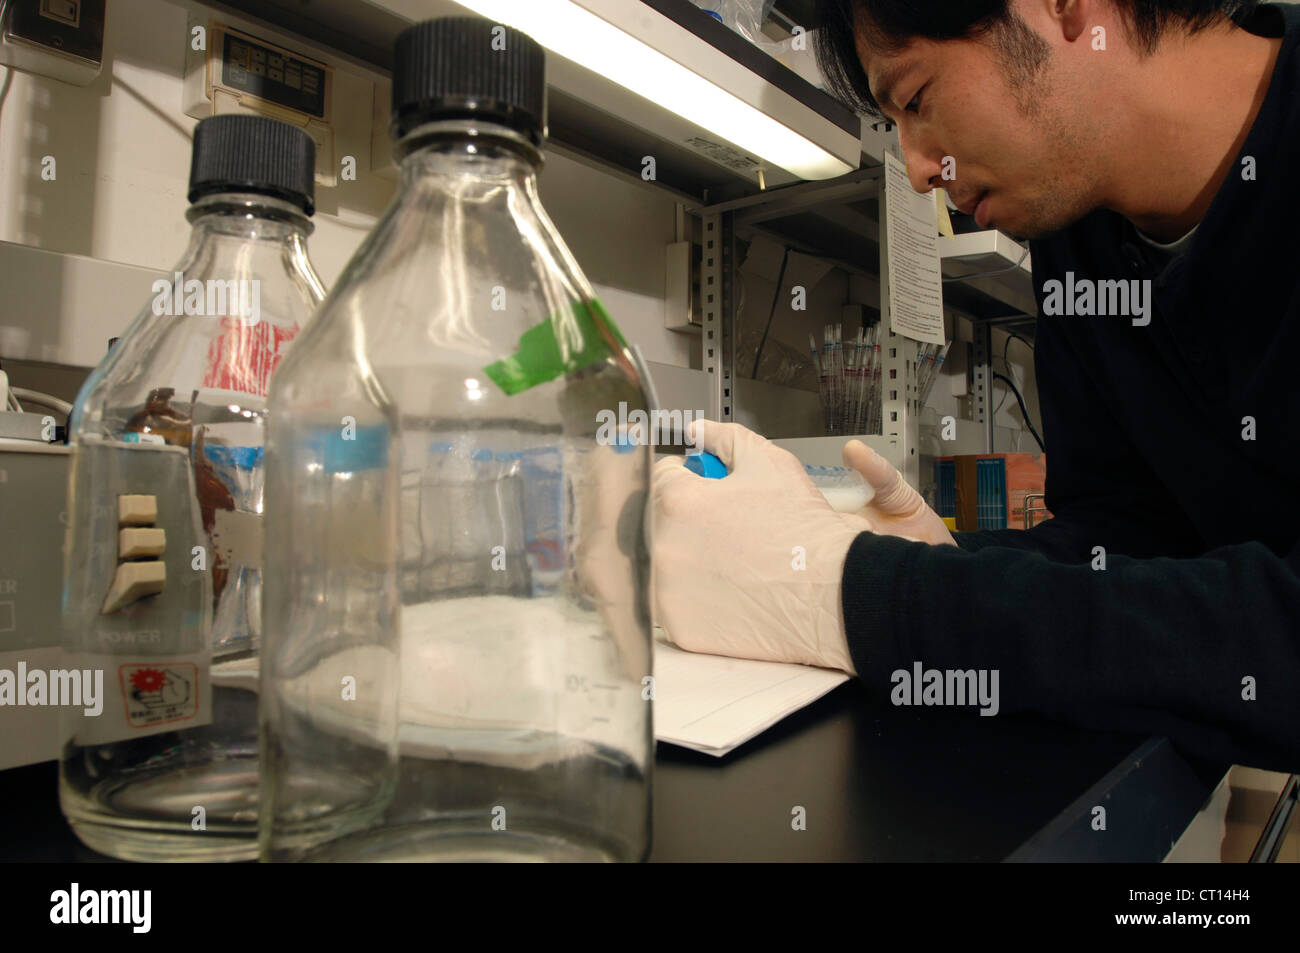 A technician working with stem cell research Stock Photo